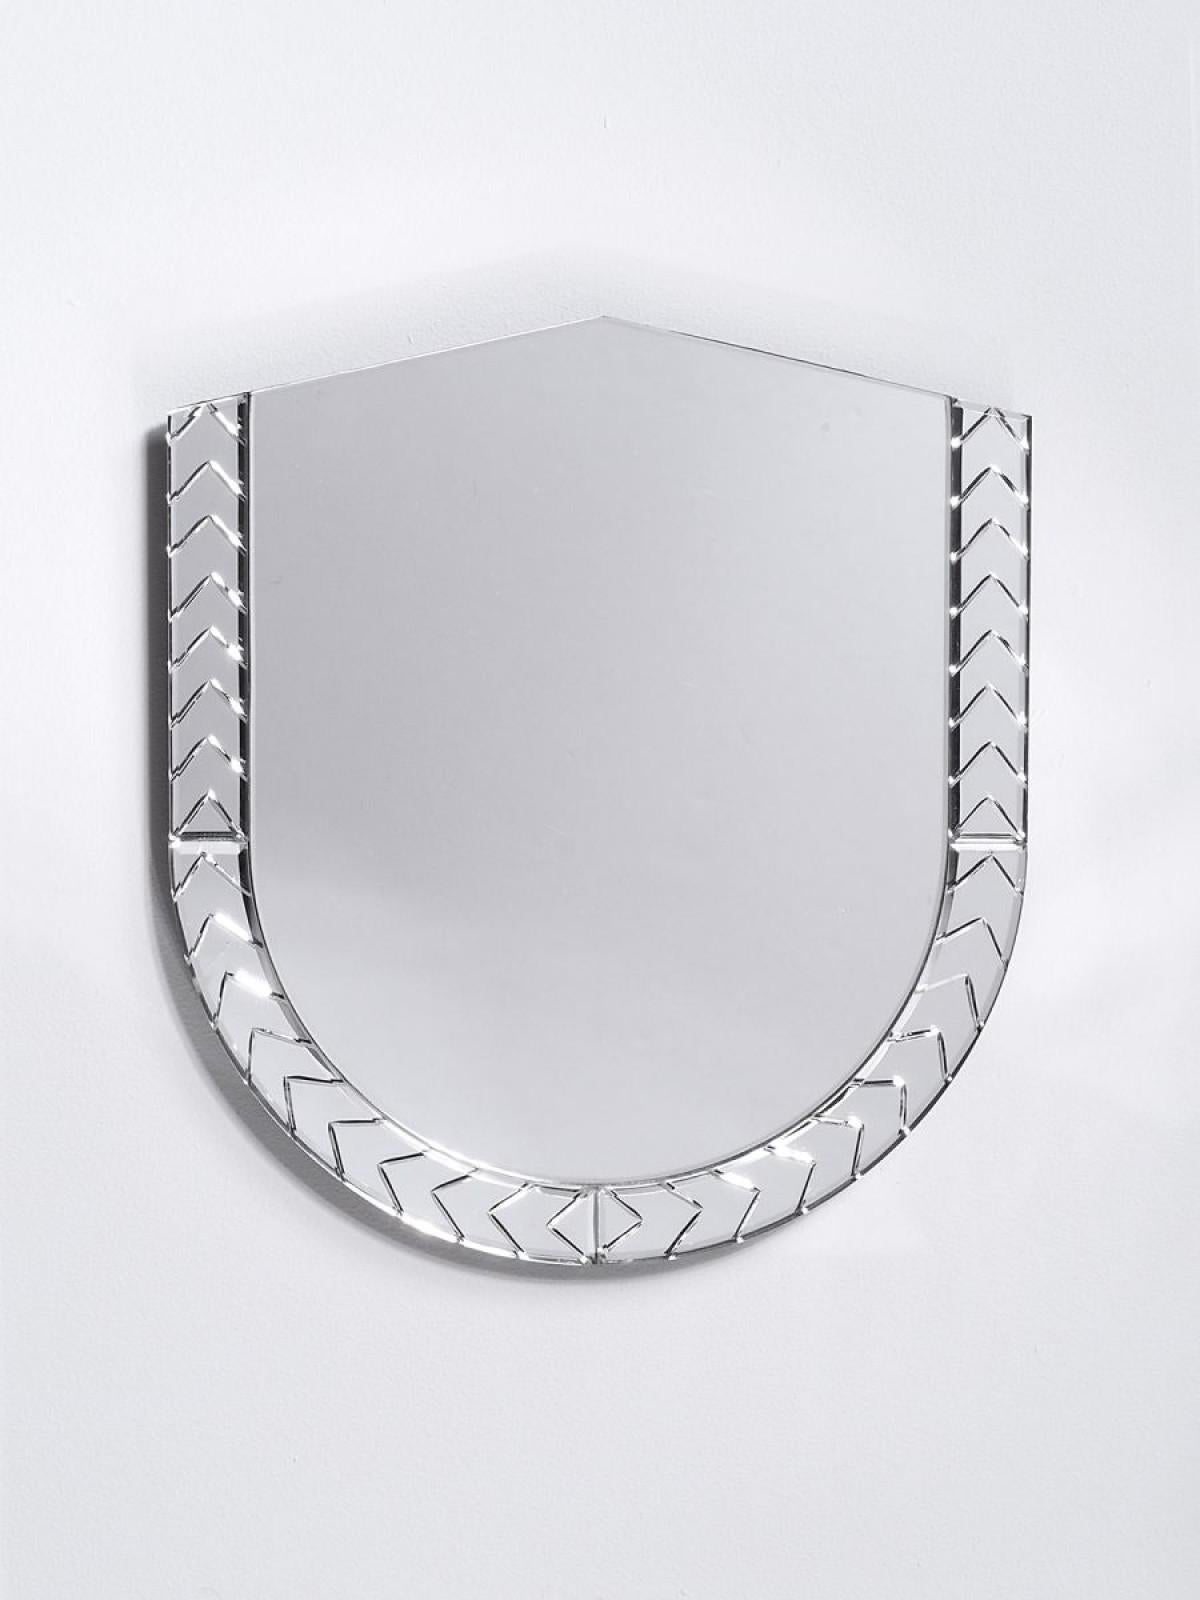 Scena Elemento Due Murano mirror by Nikolai Kotlarczyk
Dimensions: D 3 x W 30 x H 30 cm 
Materials: silvered carved glass, dark grey wood back. 
Also available in other designs and dimensions. Please contact us for more information.